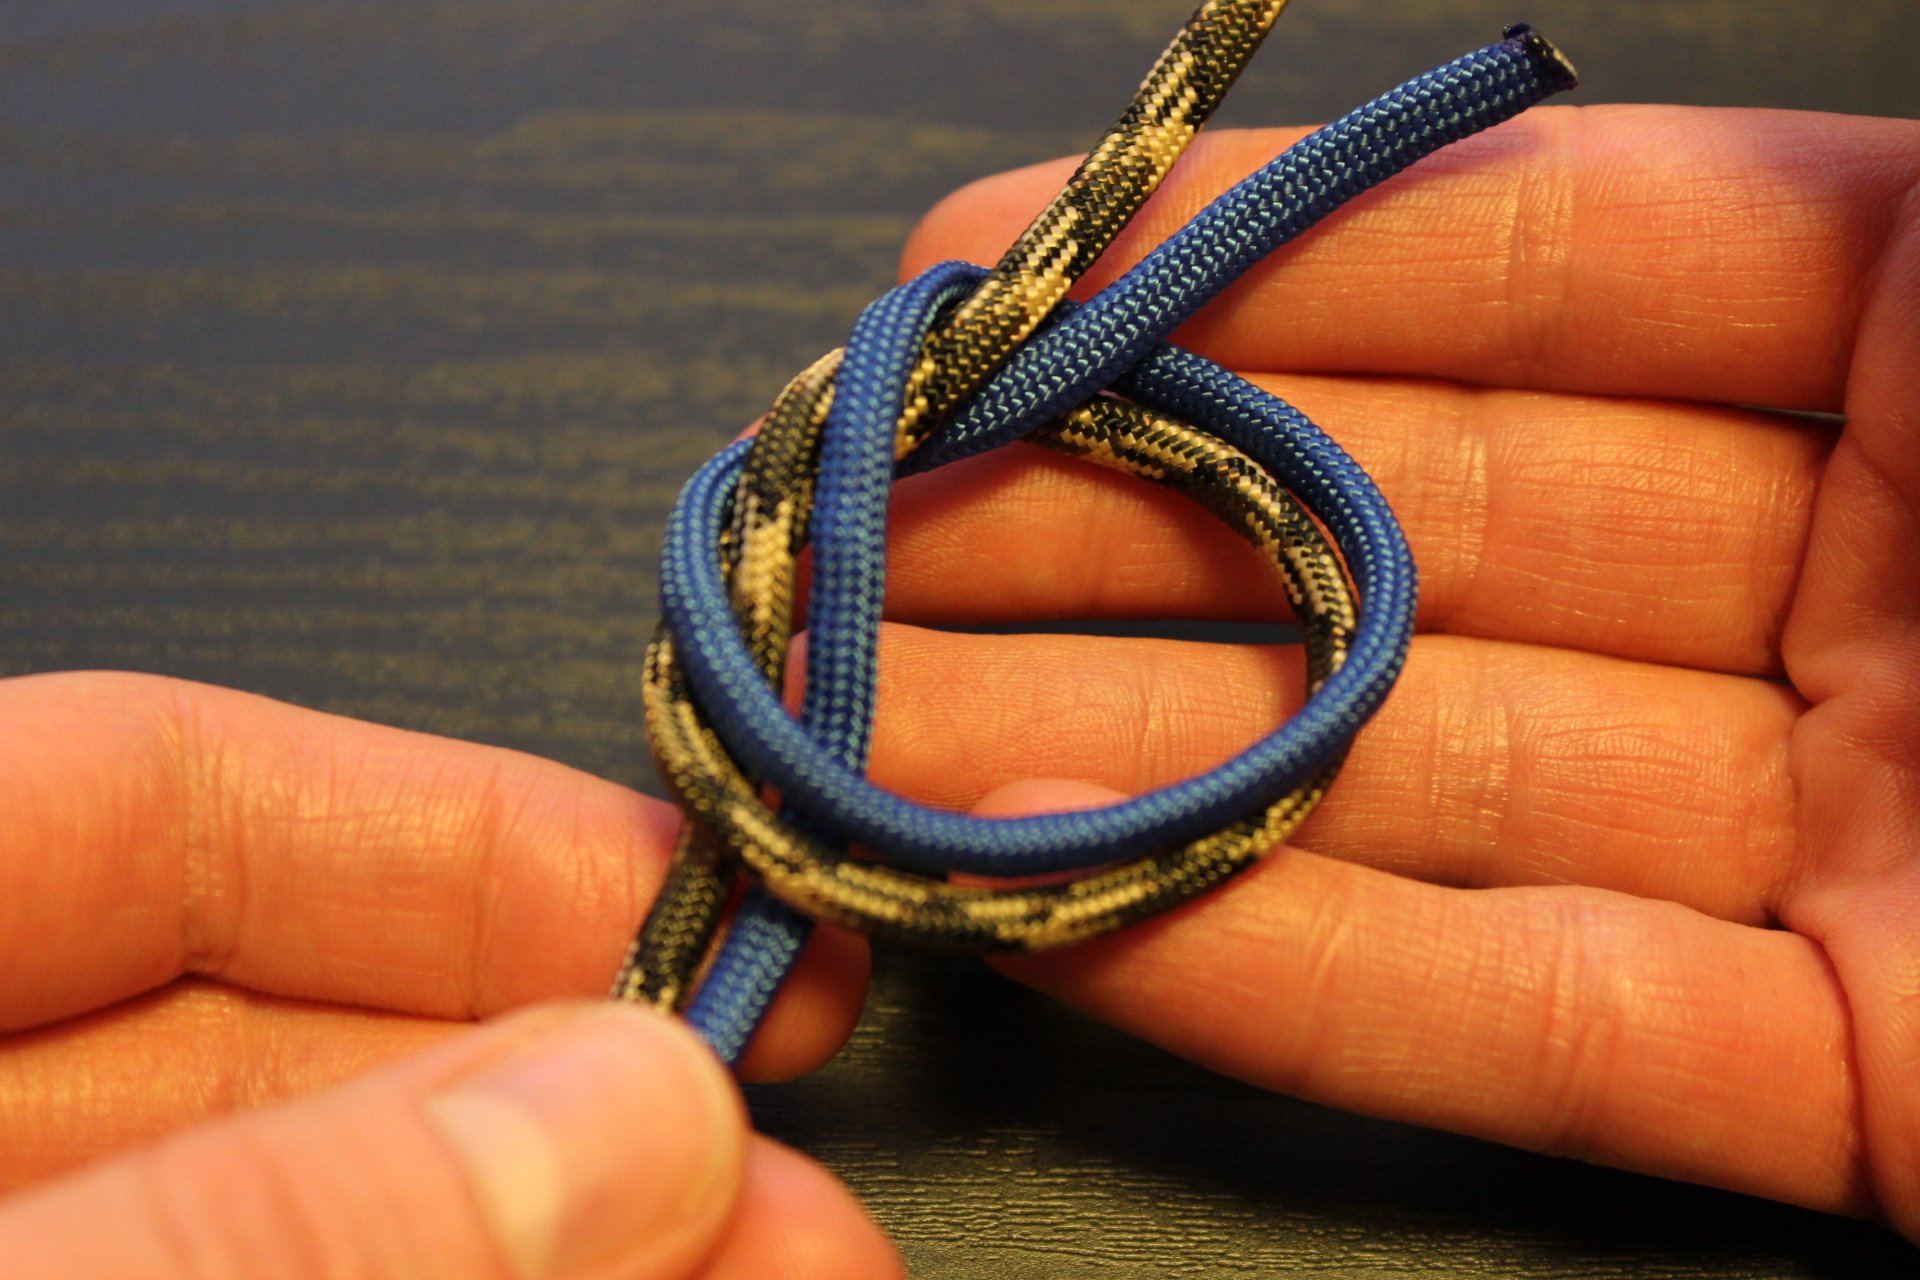 Knot Craft: Creating A Lanyard With A Snake Knot